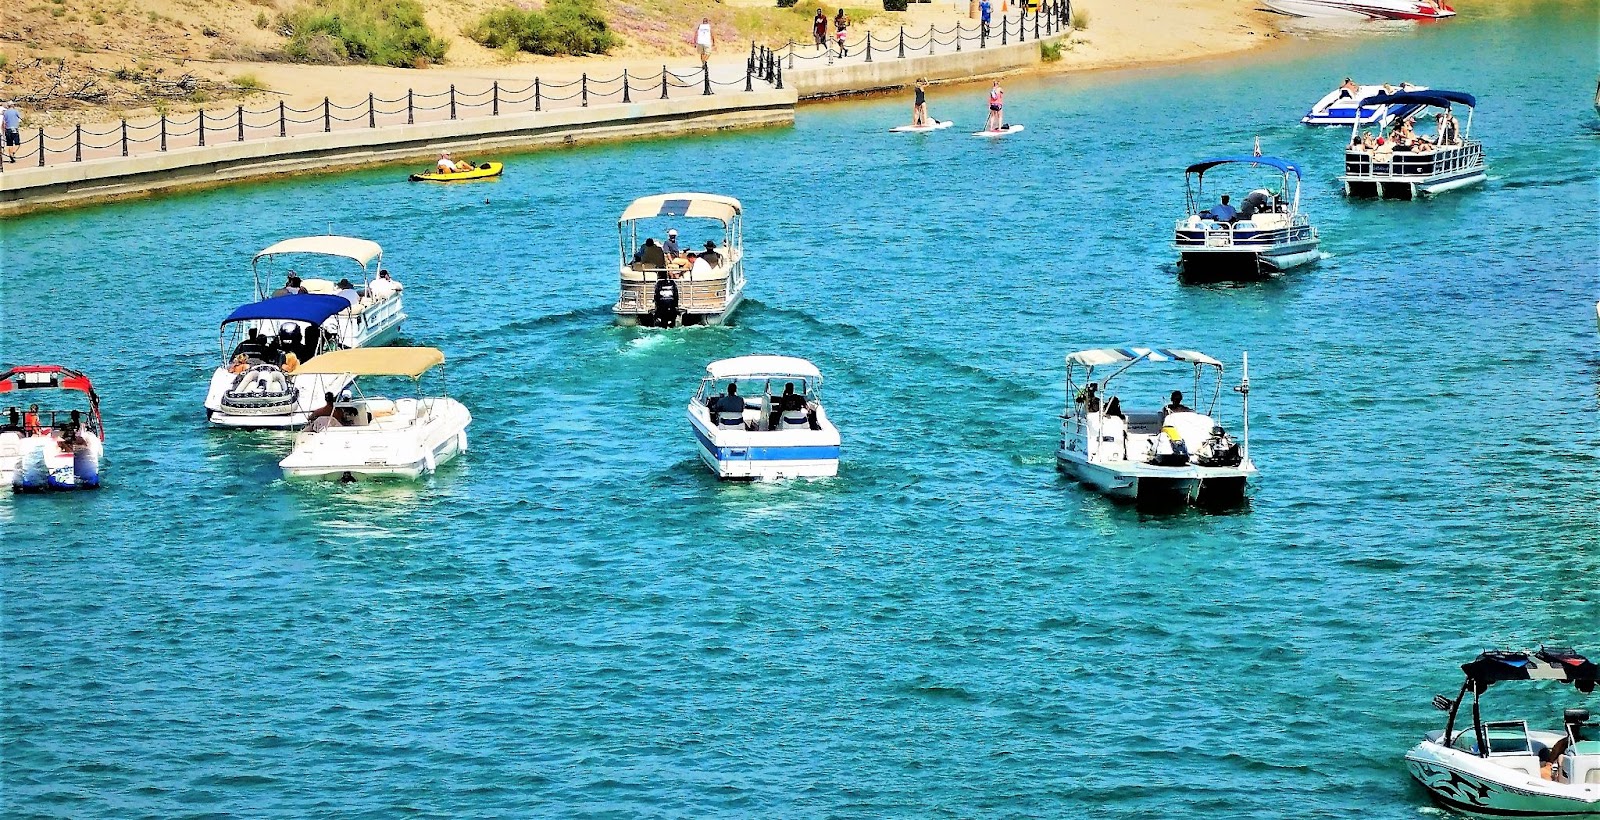 Several pontoon boats float on a lake. In the background, the shoreline is visible and people walk along a path.
